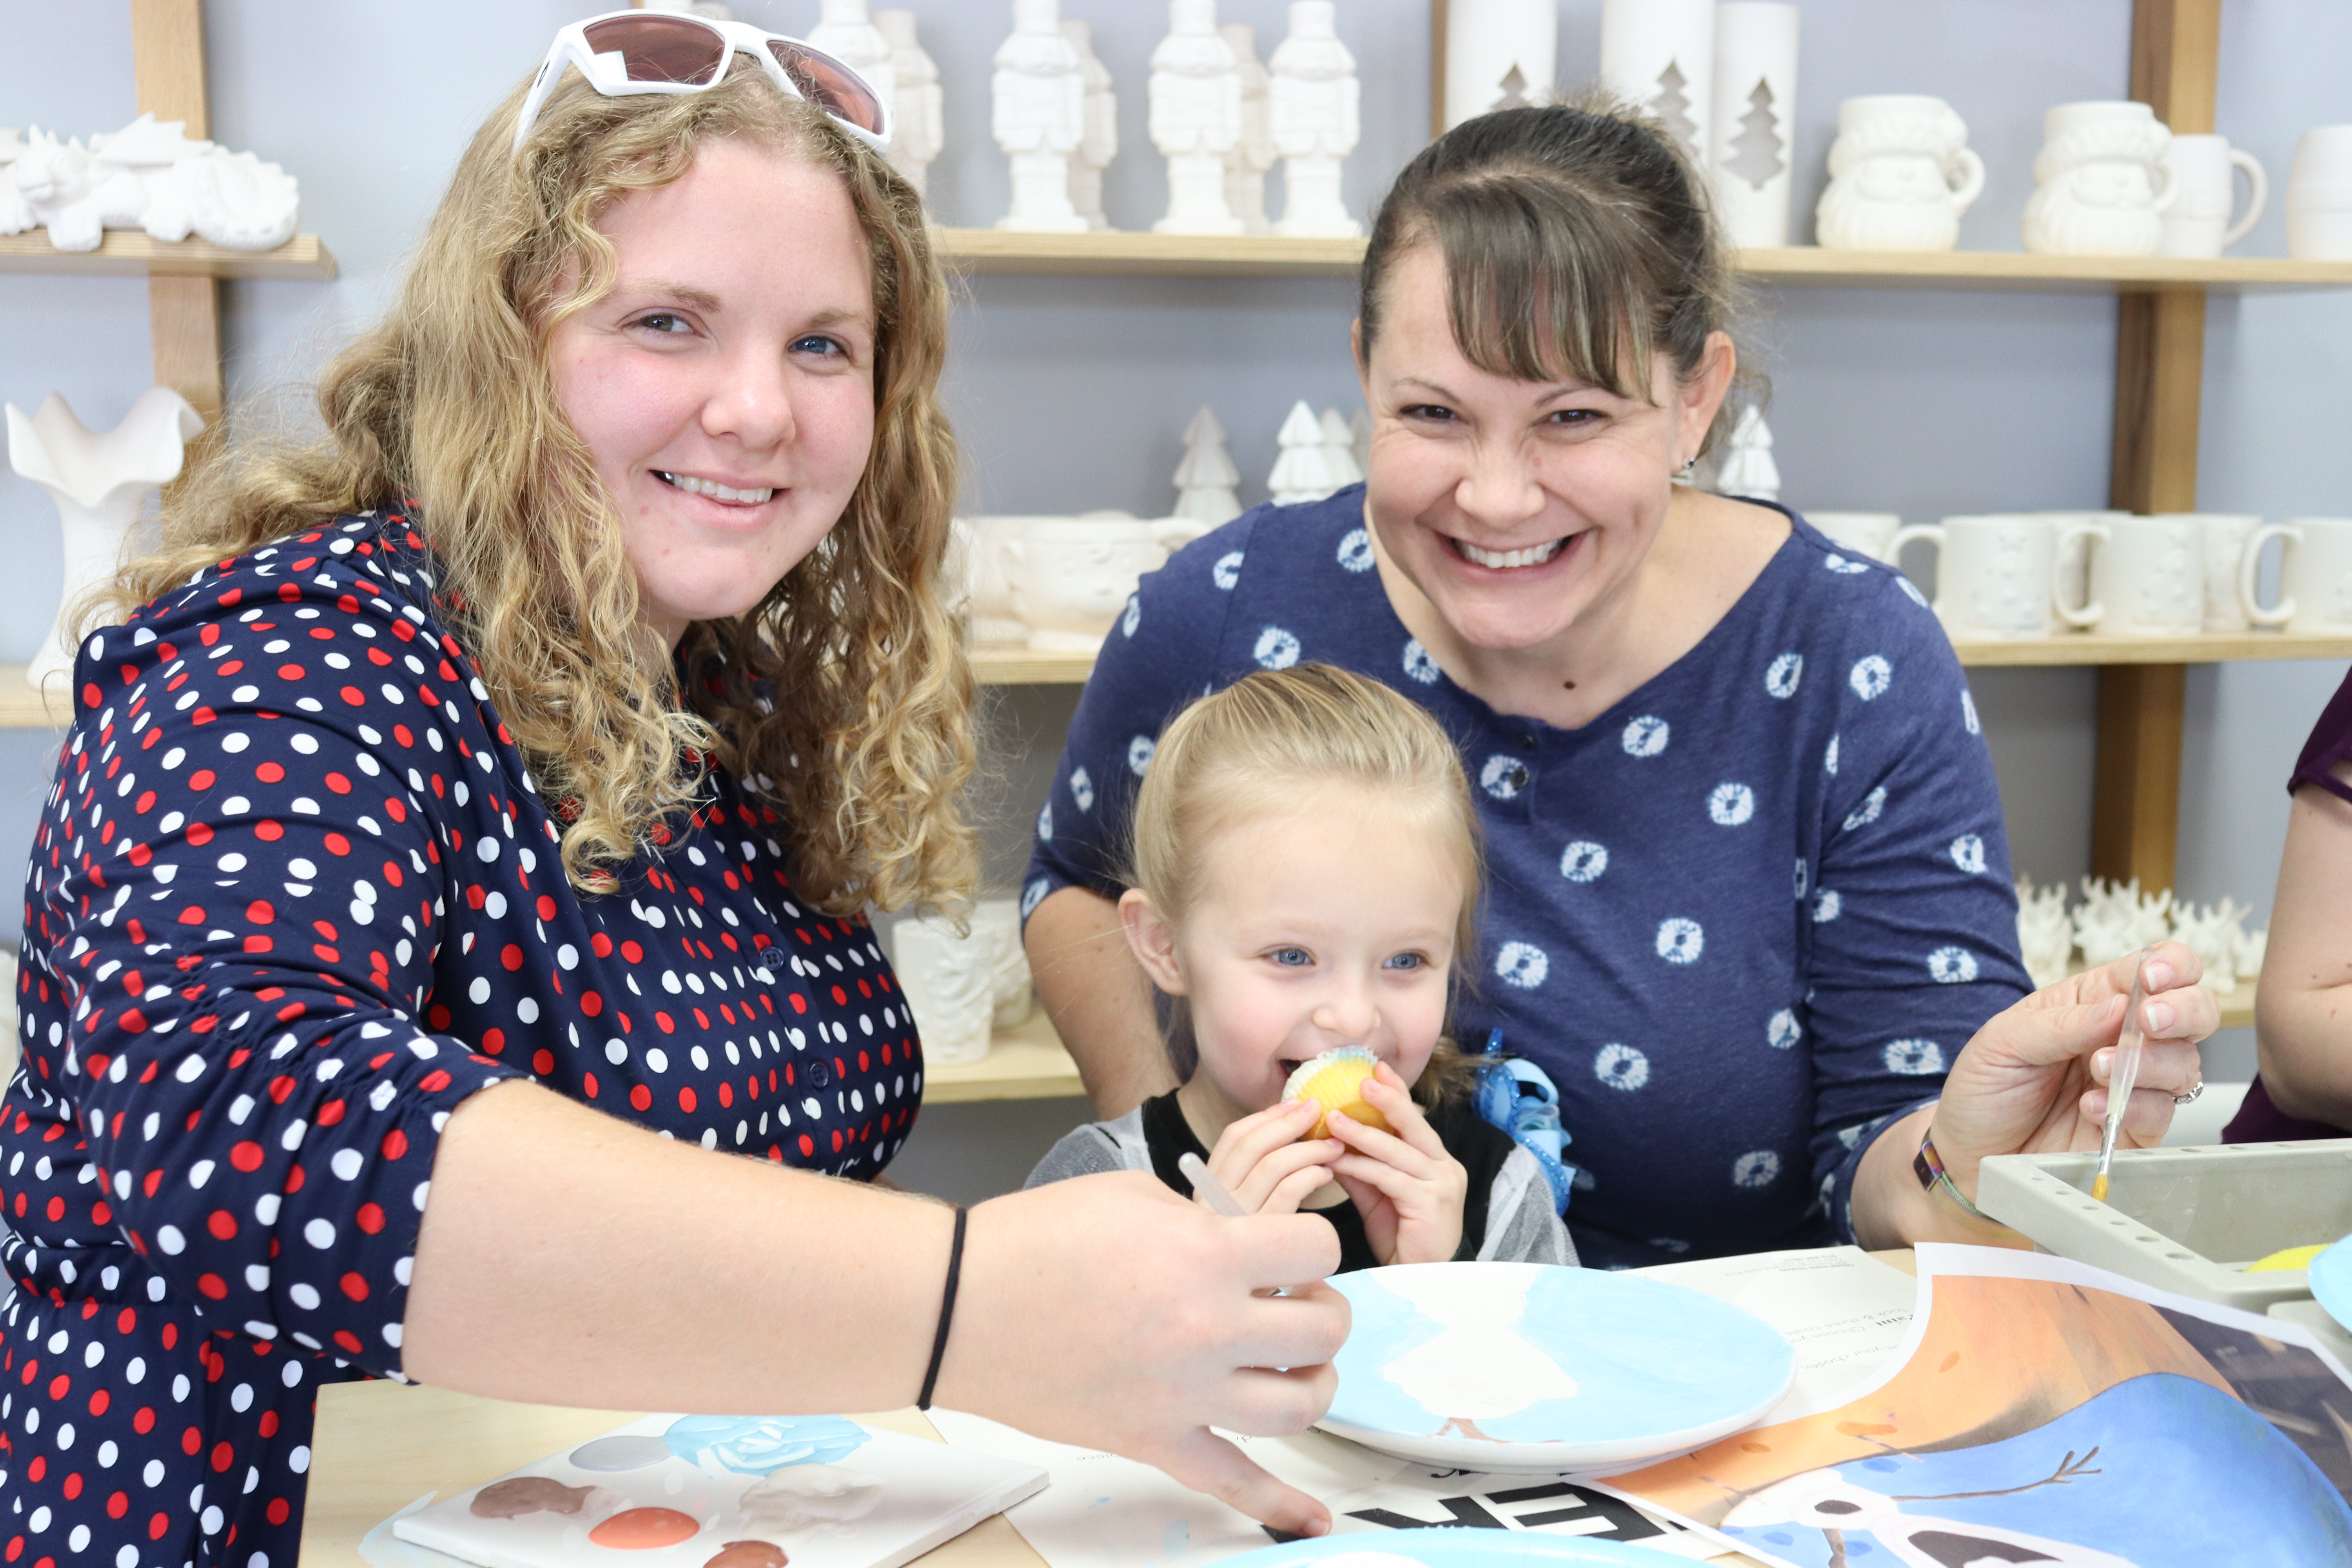 Family Fun at the Pottery Parlor